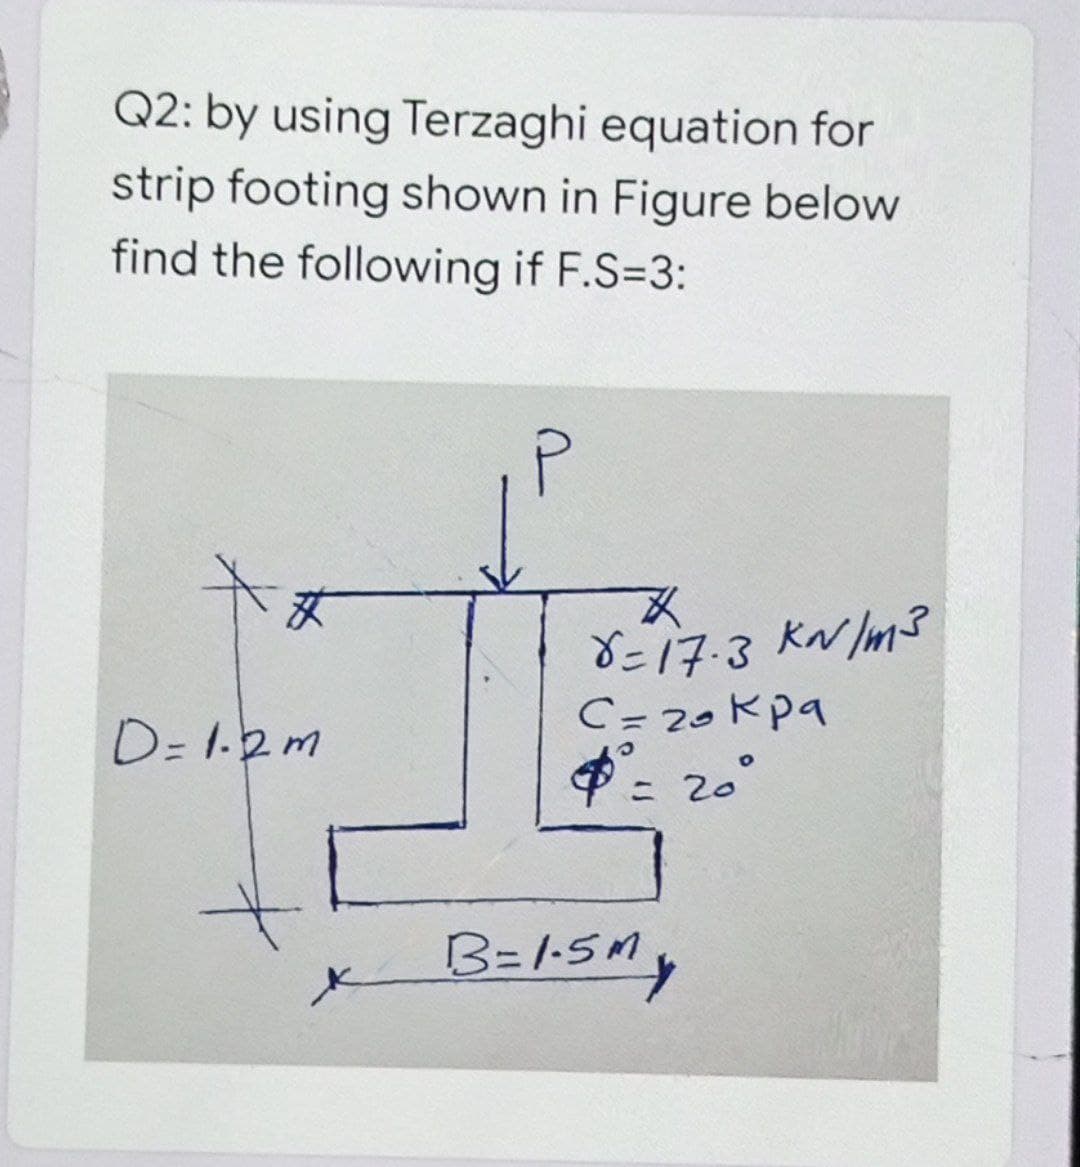 Q2: by using Terzaghi equation for
strip footing shown in Figure below
find the following if F.S=3:
艾
8=17-3 KN /m3
C= 20kpa
: 20°
D= 1.2m
B=1-5M,
